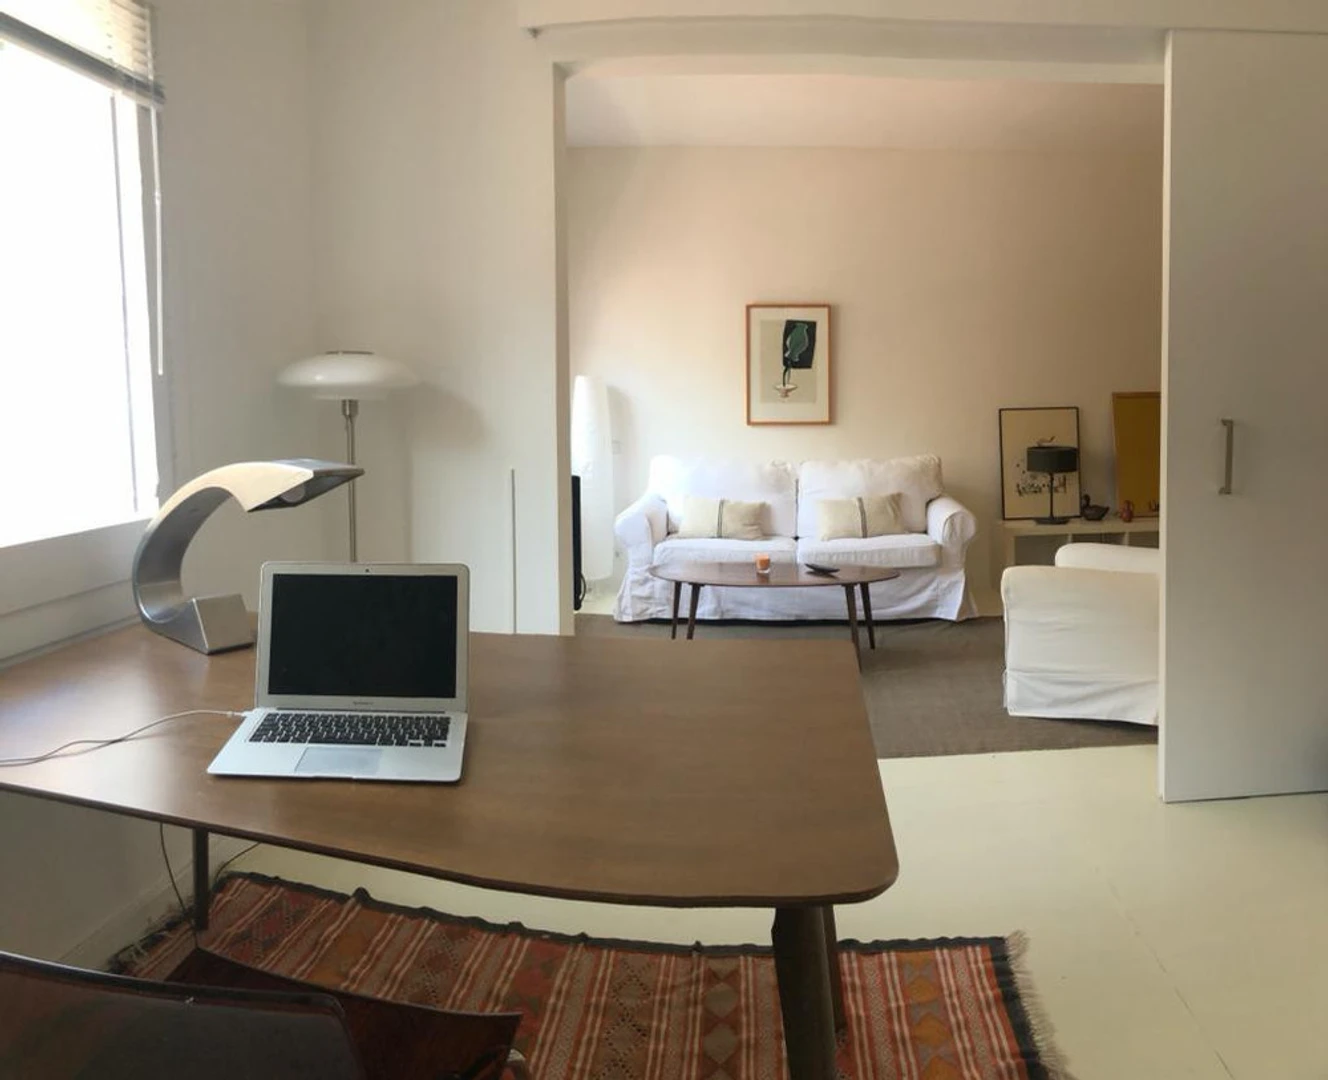 Accommodation in the centre of Barcelona